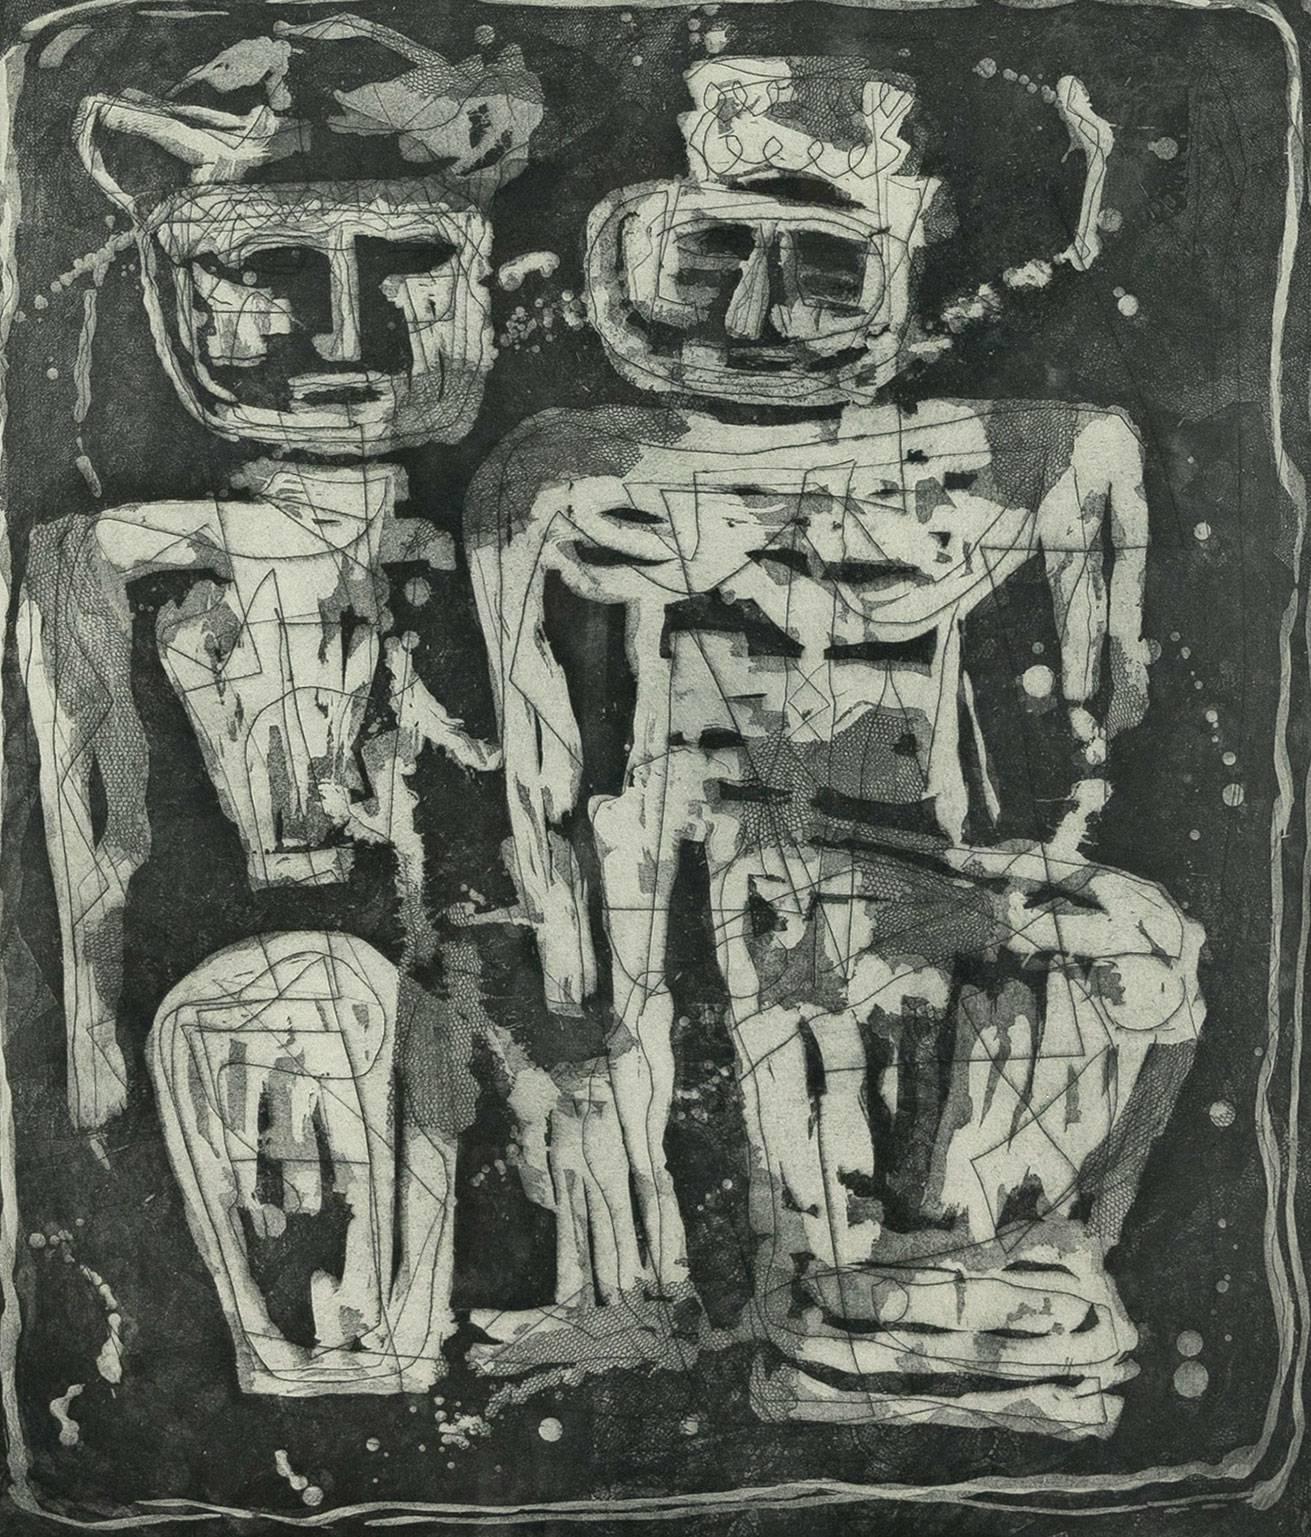 Although Nevelson is best known for her work as a sculptor, like many of her American contemporaries, Nevelson explored the many different branches of printmaking, as the field experienced a mid-century renaissance.  

This etching is a particularly